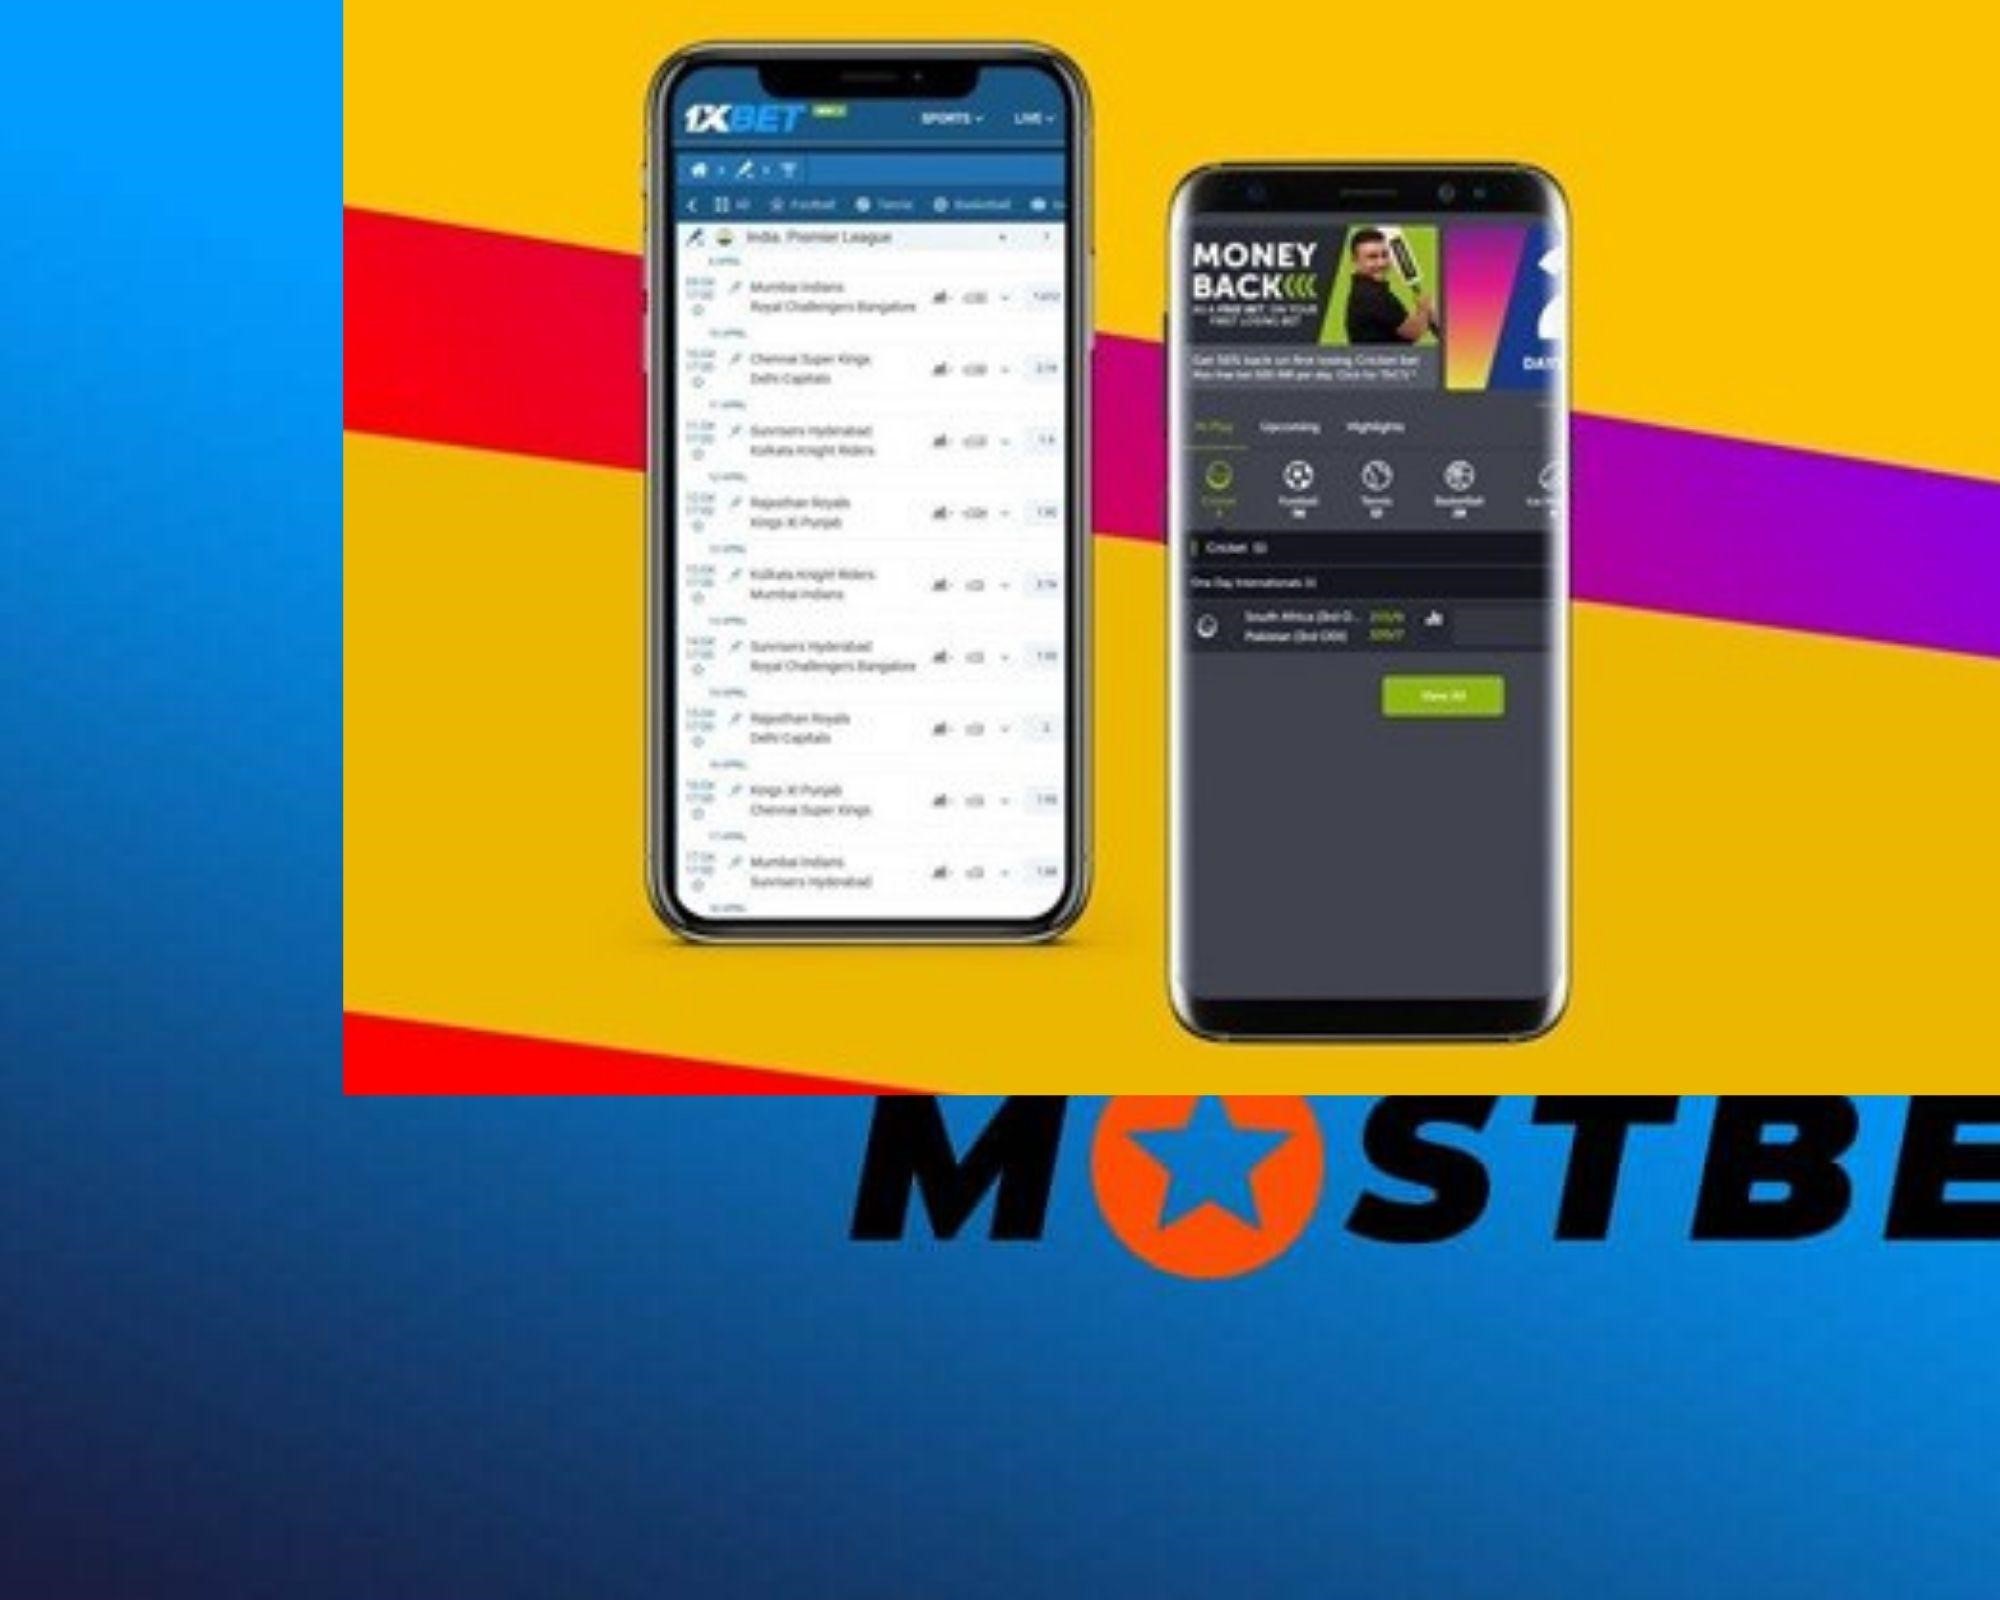 The No. 1 24 Betting App Download Mistake You're Making